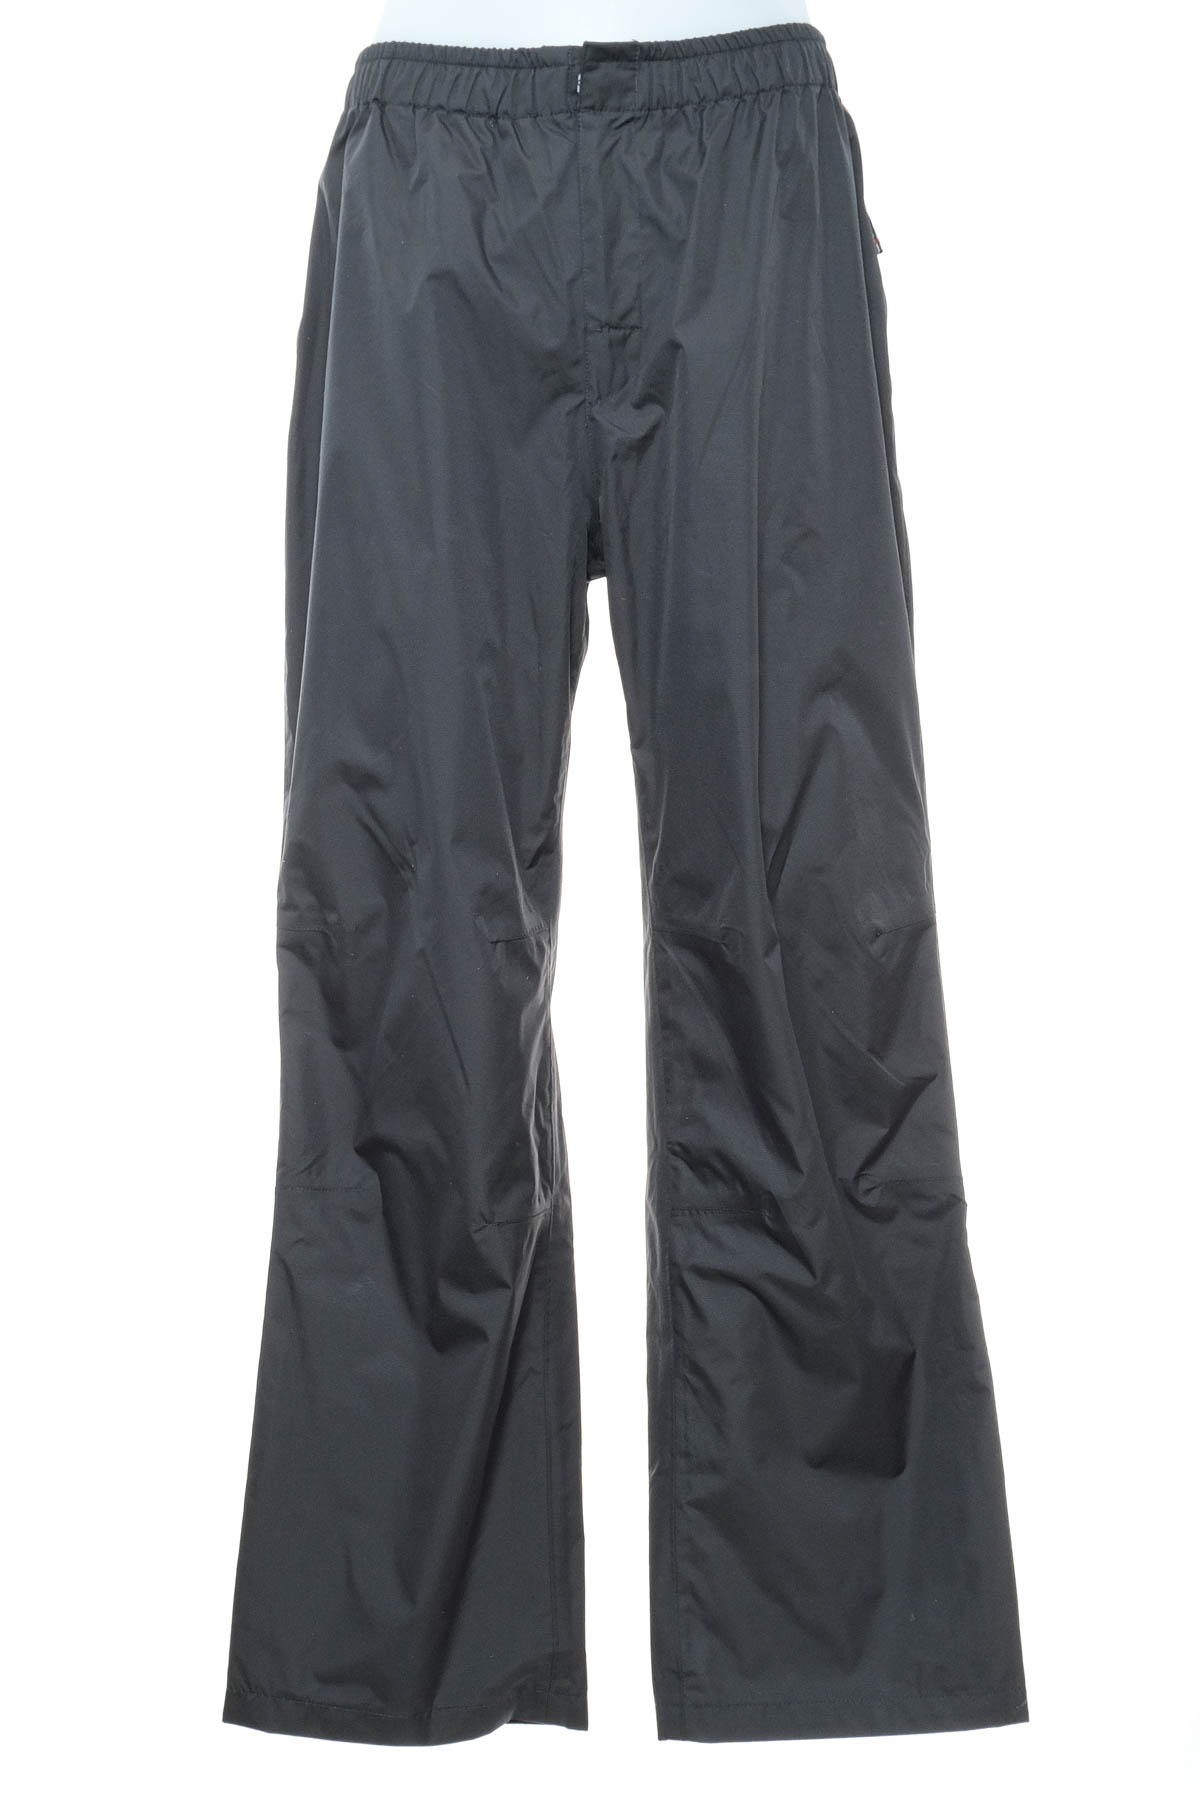 Men's trousers - System - 0